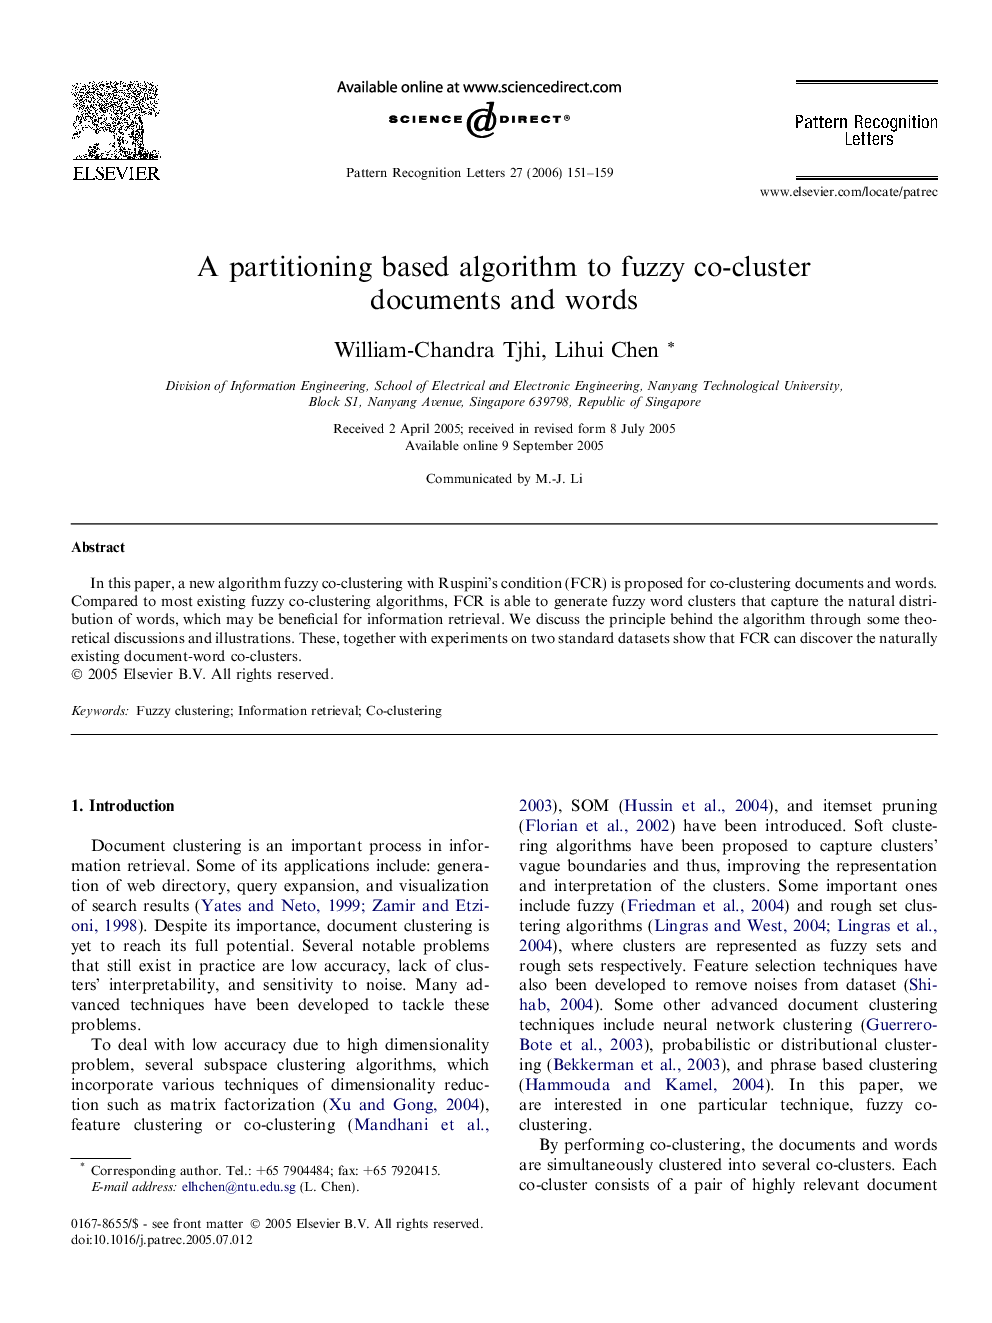 A partitioning based algorithm to fuzzy co-cluster documents and words